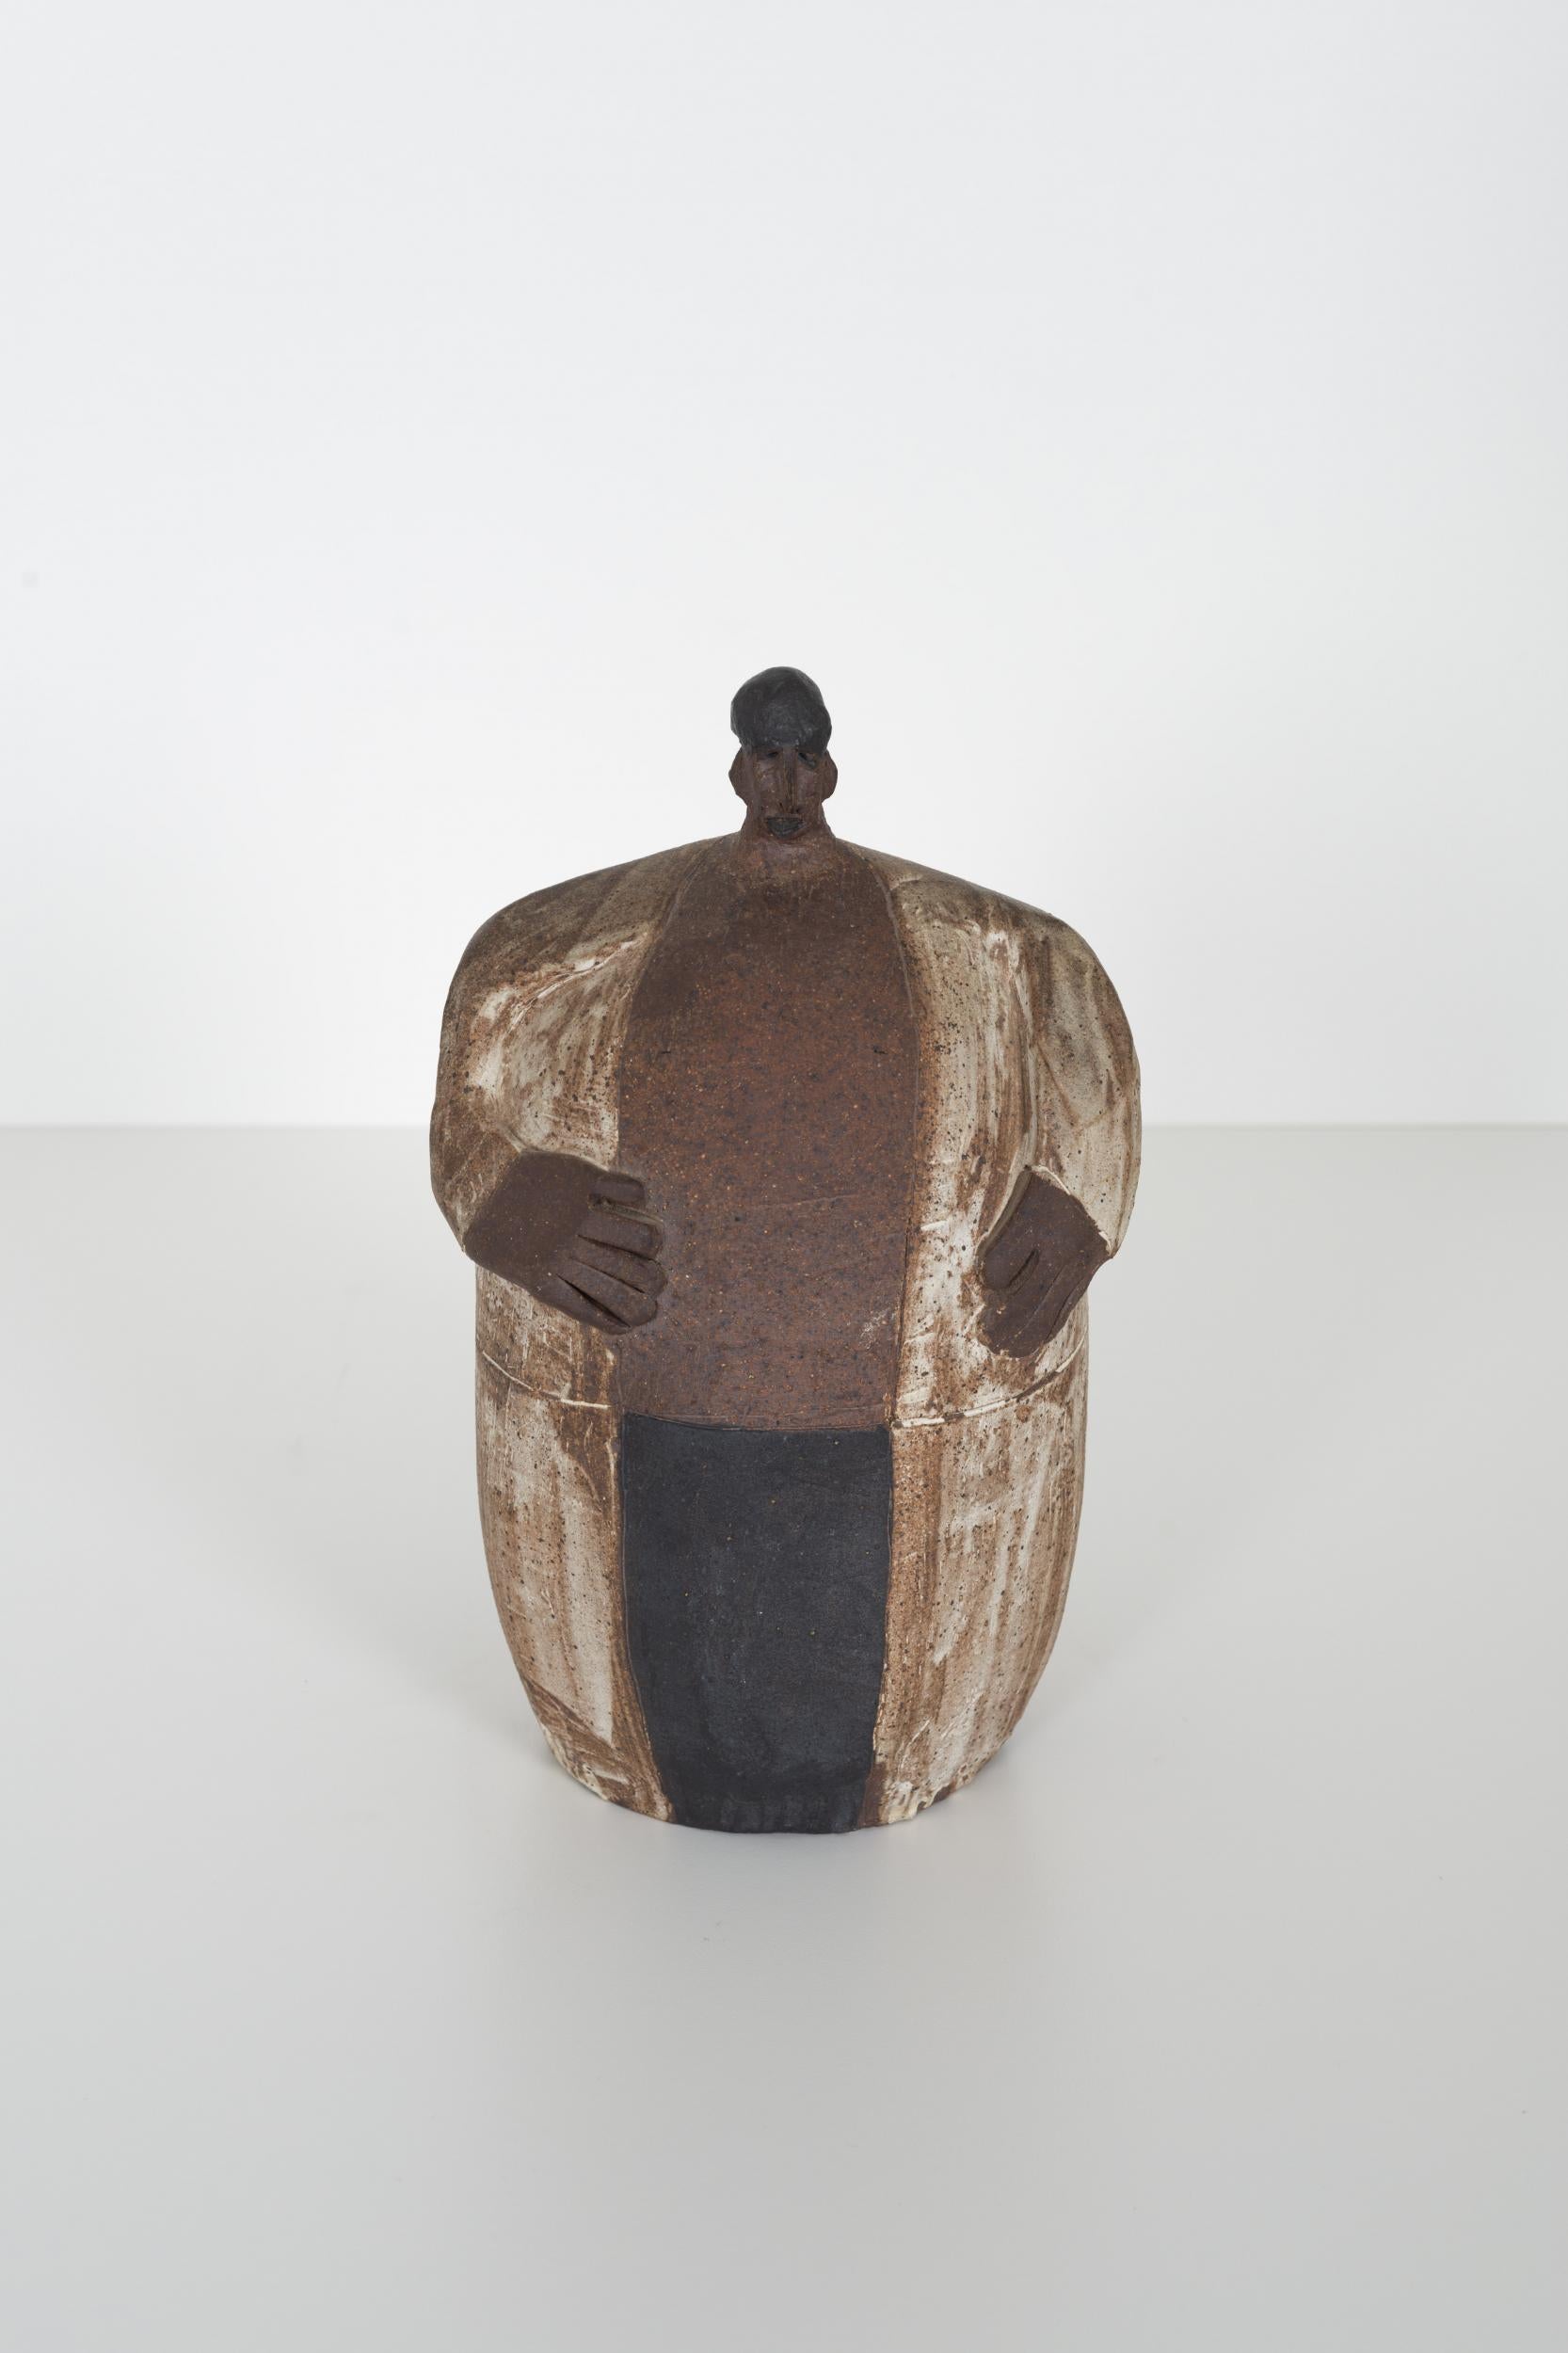 Ceramic male figure, fired stoneware with monochromatic pattern.
Incised signature underside.